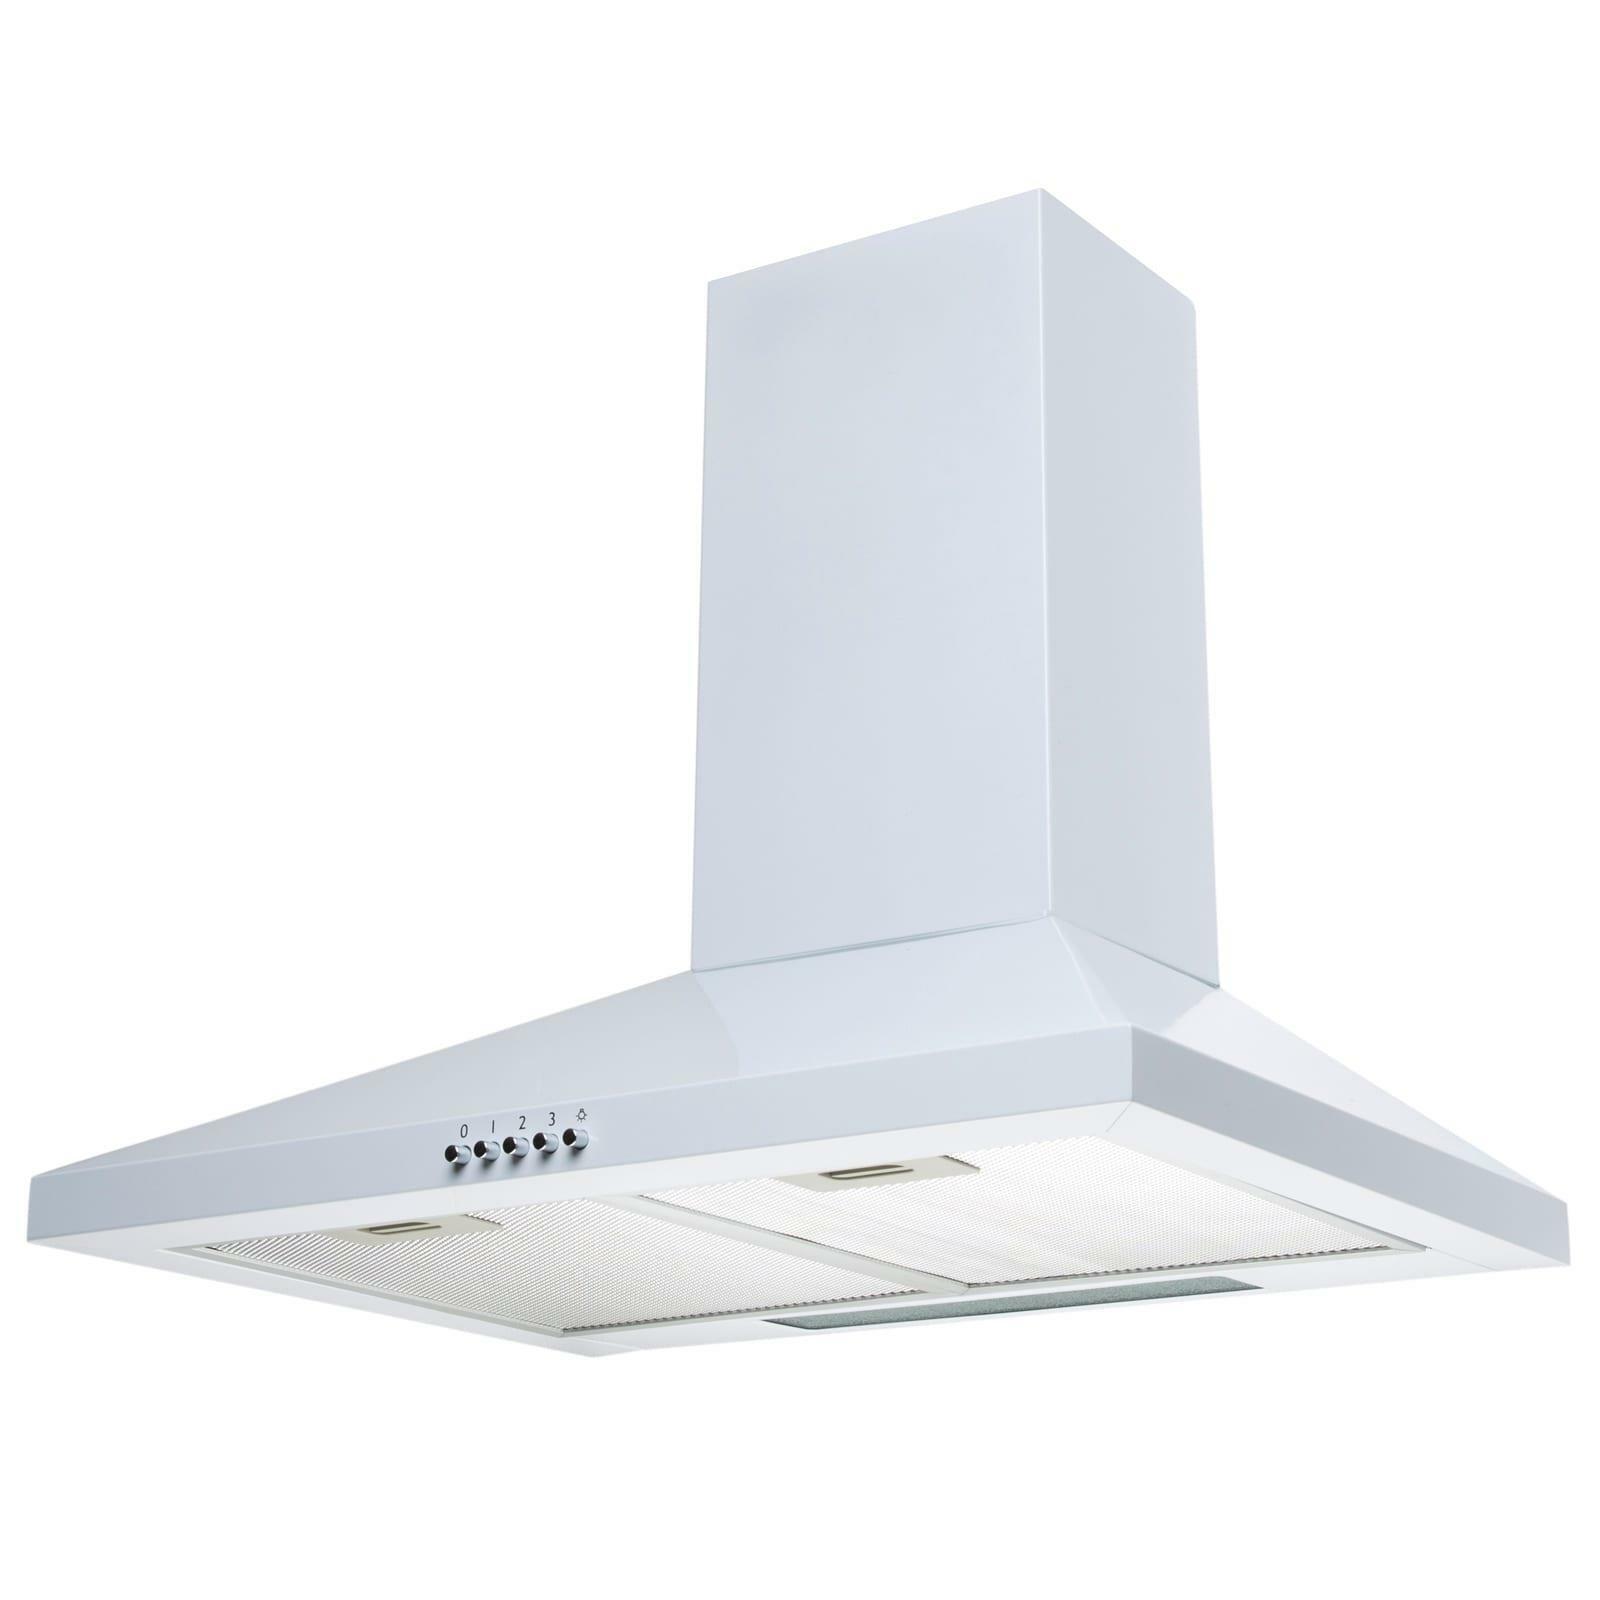 White Pyramid Cooker Hood with 3 Speeds